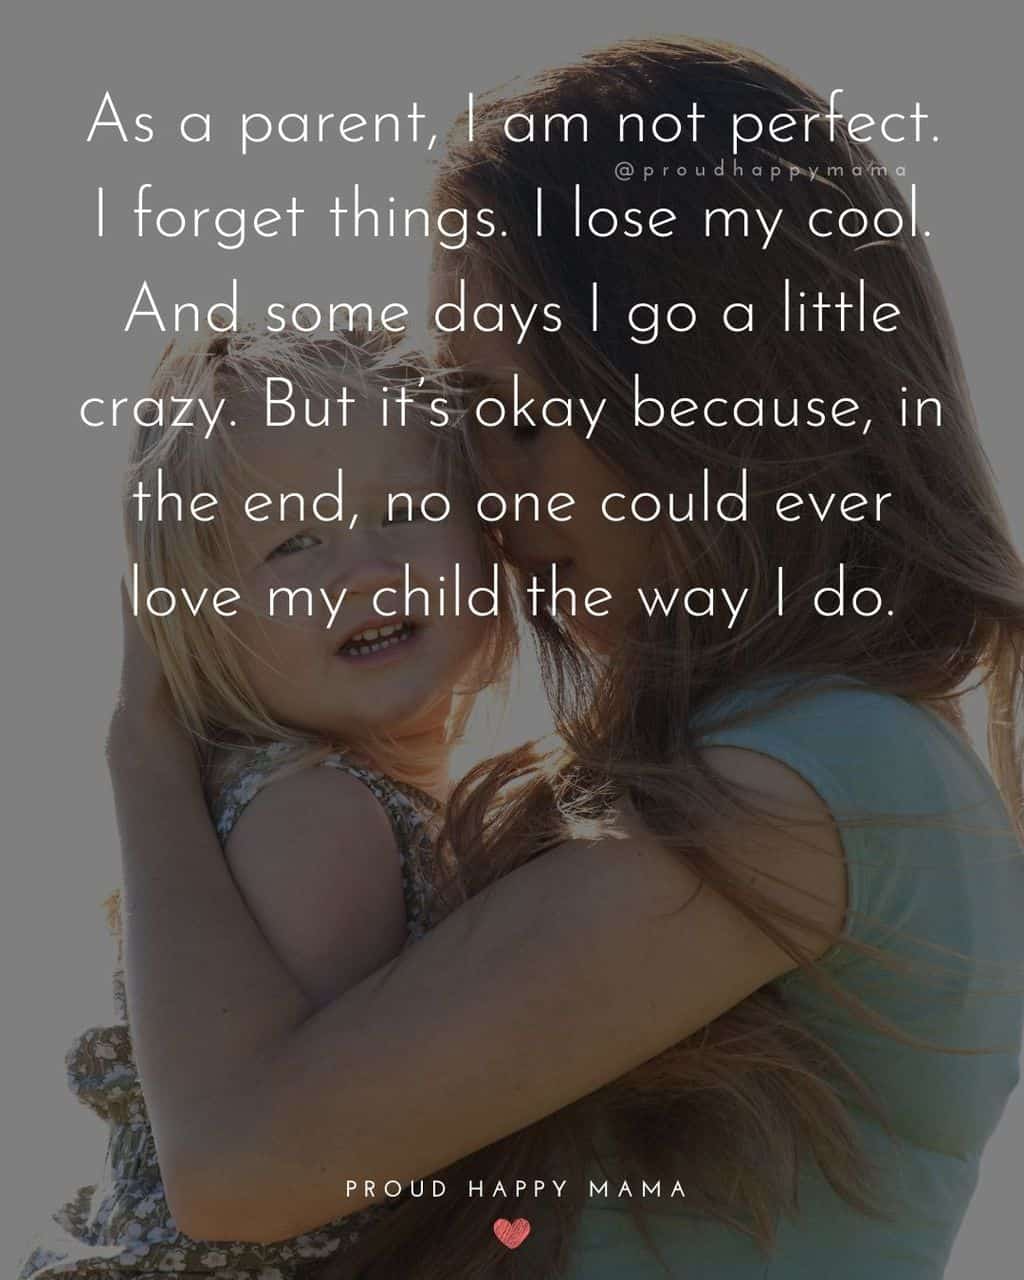 Parenting Quotes - As a parent, I am not perfect. I forget things. I lose my cool. And some days I go a little crazy. But it’s okay, because in the 